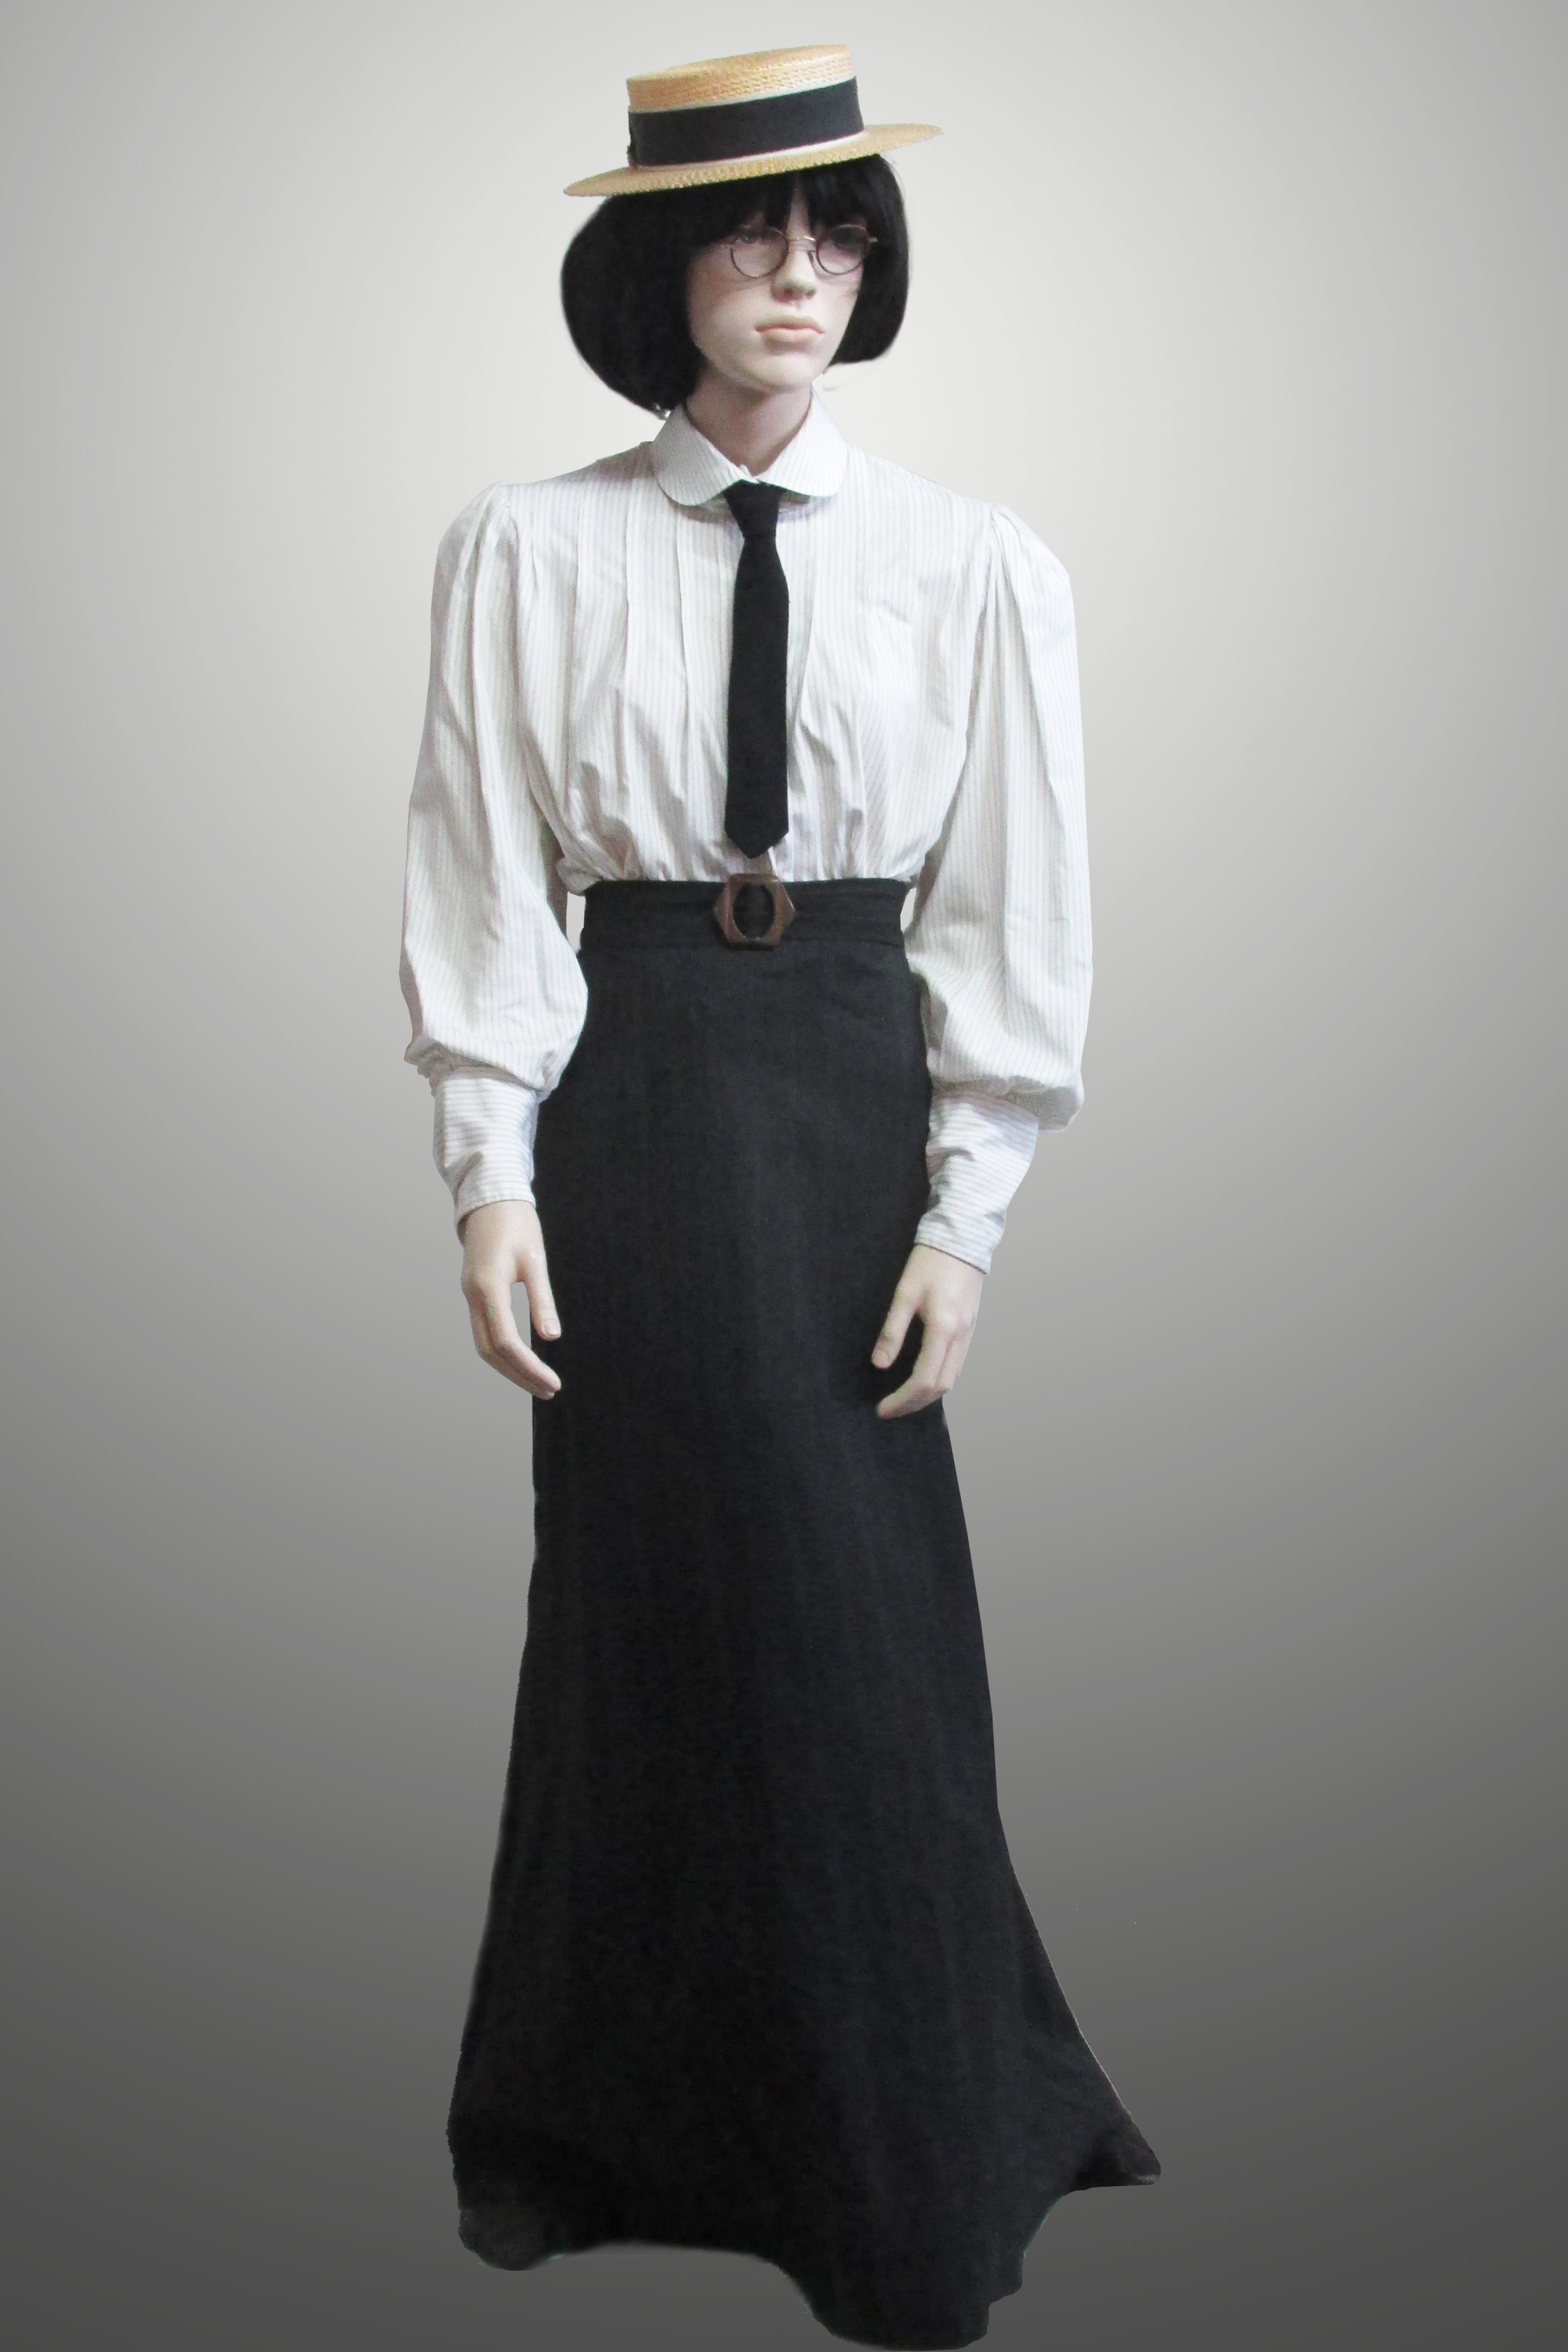 Blouse and Straight Skirt Plus Tie and Boater